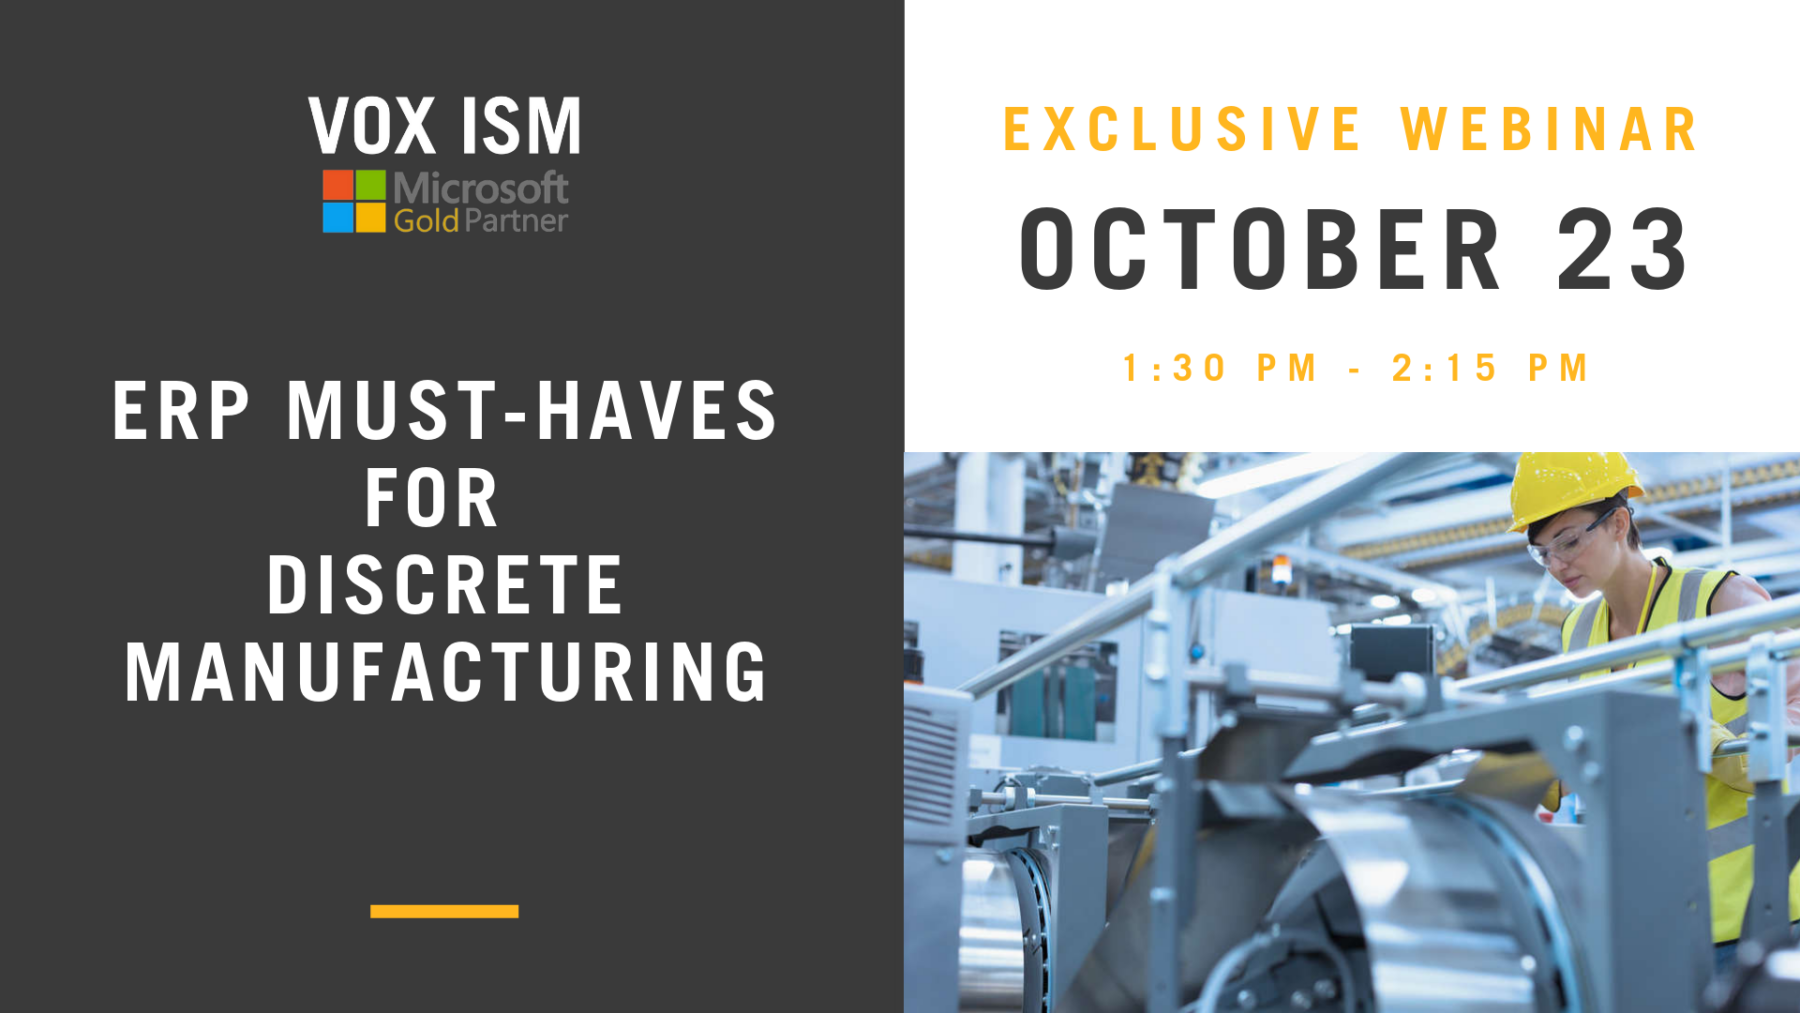 ERP Must-Haves for Discrete Manufacturing - October 23 - Webinar - VOX ISM